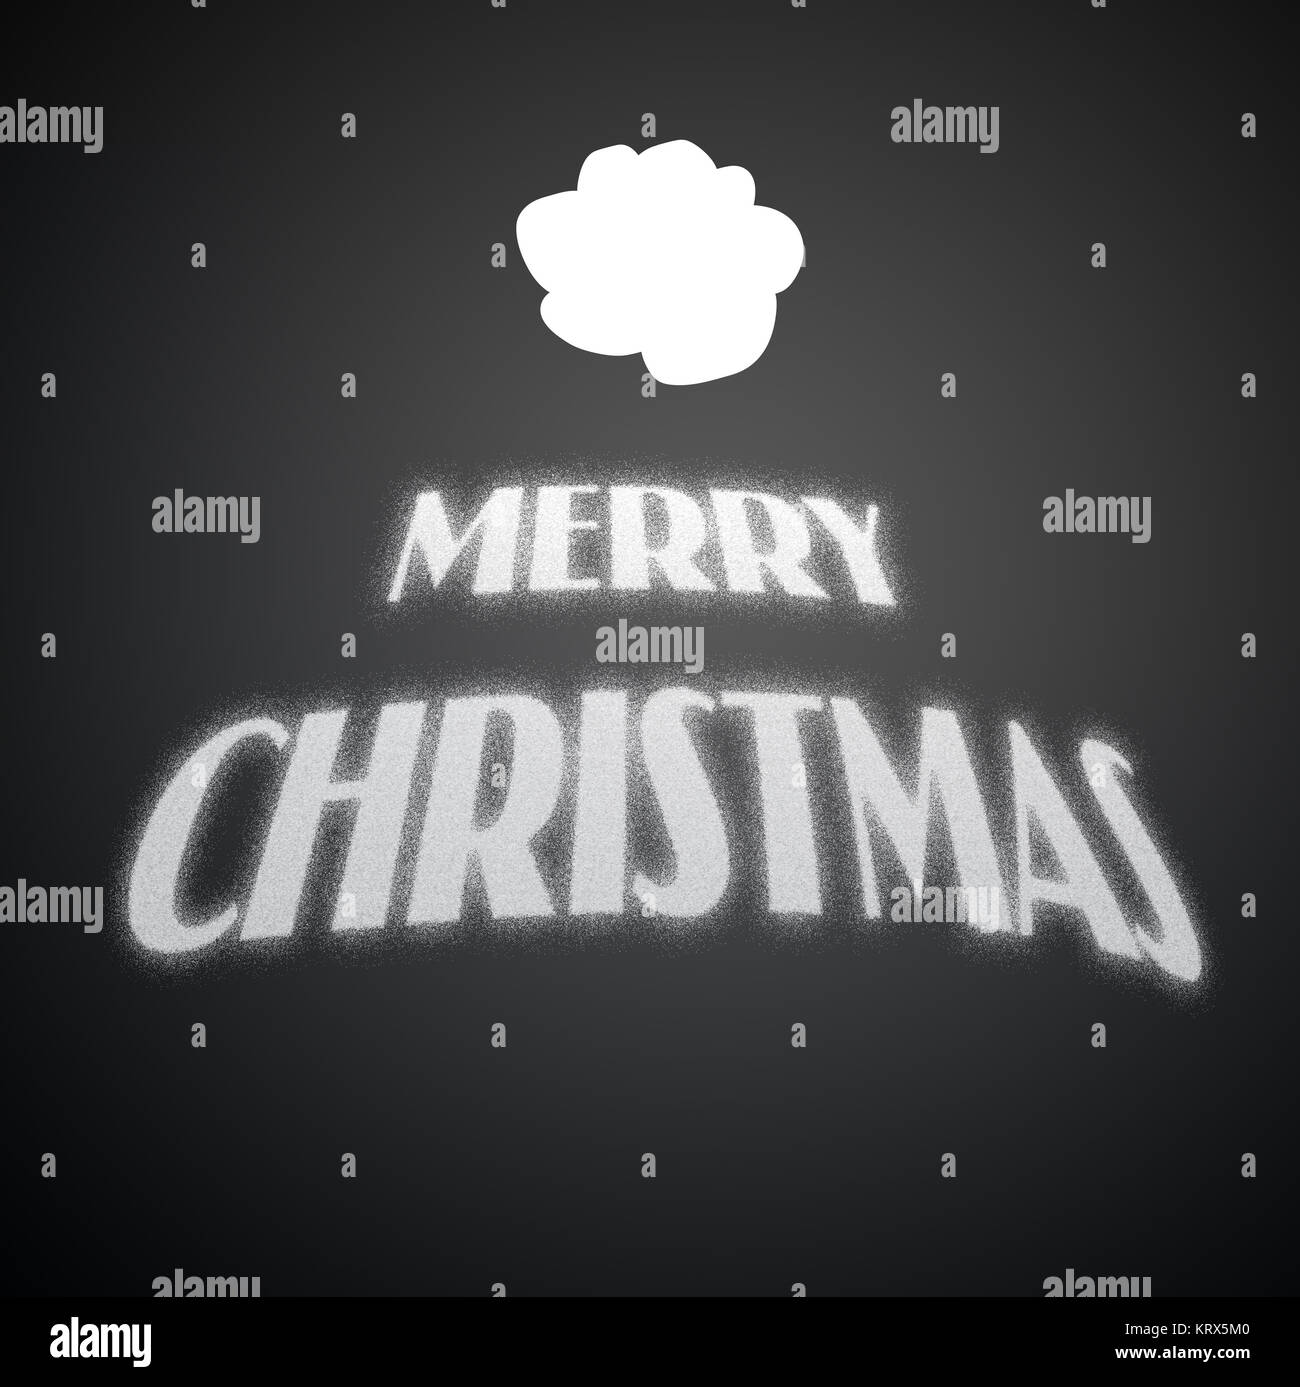 The happy Merry Christmas background Stock Photo